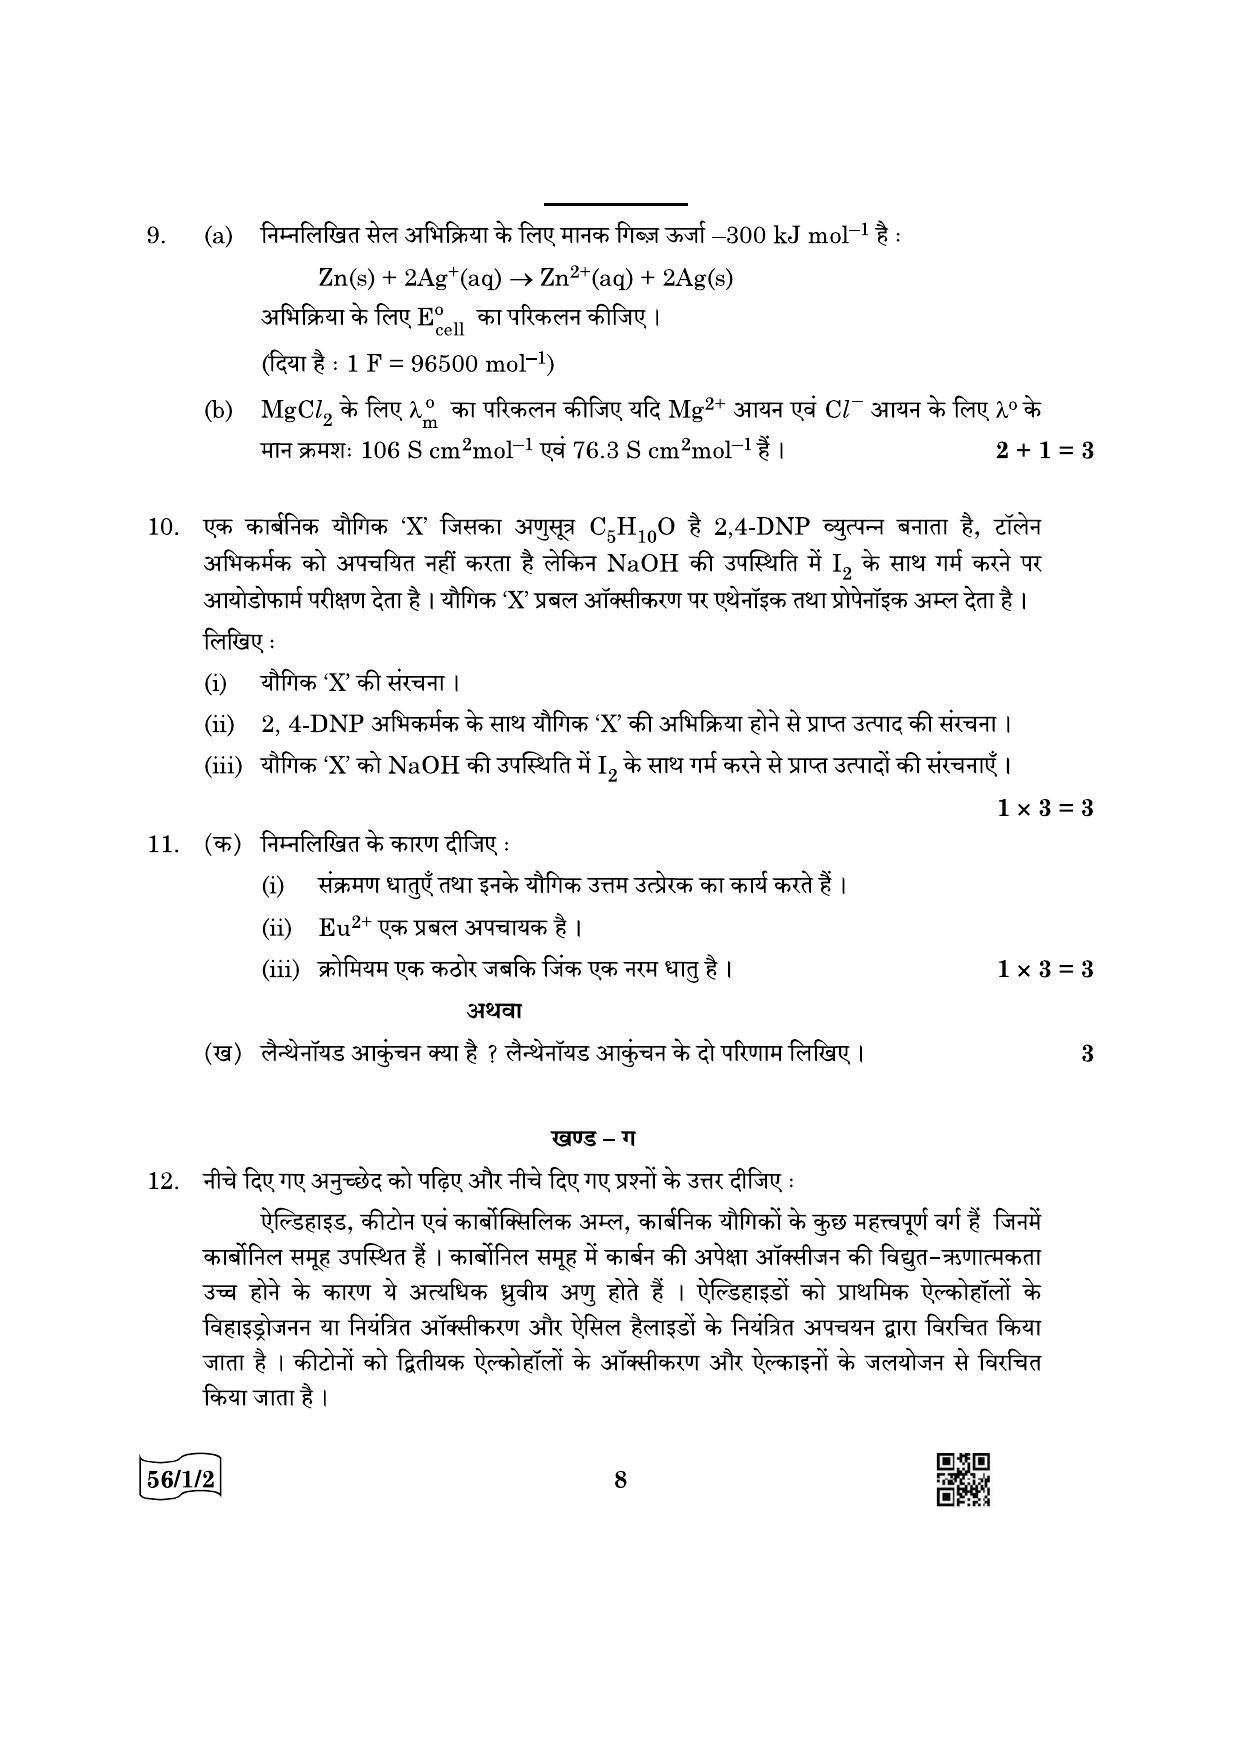 CBSE Class 12 56-1-2 Chemistry 2022 Question Paper - Page 8